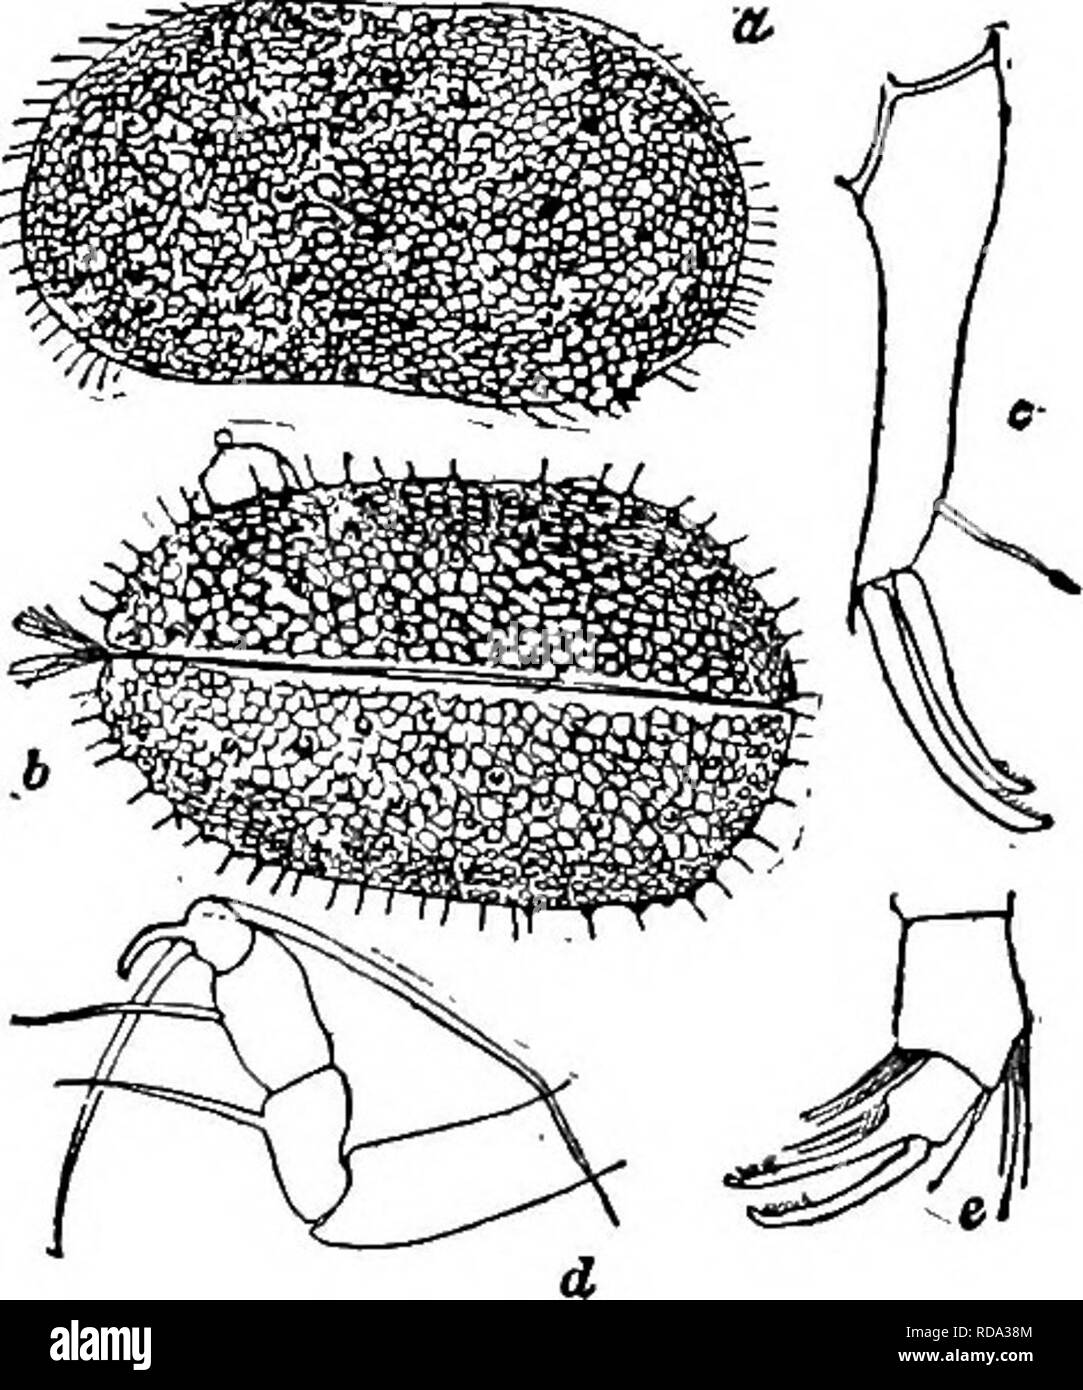 . Fresh-water biology. Freshwater biology. THE OSTRACODA 823 91 Terminal segment of second leg with three unlike setae, one of which is reflexed (Fig. 1291 d). Subfamily Candoninae . 92 92 (94) Shell reticulate, very tumid. Small, plump forms, not more than 0.80 mm. long. Second antenna of both sexes five-segmented. Paracandona Hartwig 1899 . 93 93 Shell profusely ornamented with polygonal areas and tubercles (Fig. 1291 a). Paracandona euplectella Brady and Norman 1889. Length 0.56 to 0.58 mm., height 0.32 to 0.36 mm., width 0.32 to 0.34 mm. Male somewhat larger. One terminal claw of mandibula Stock Photo